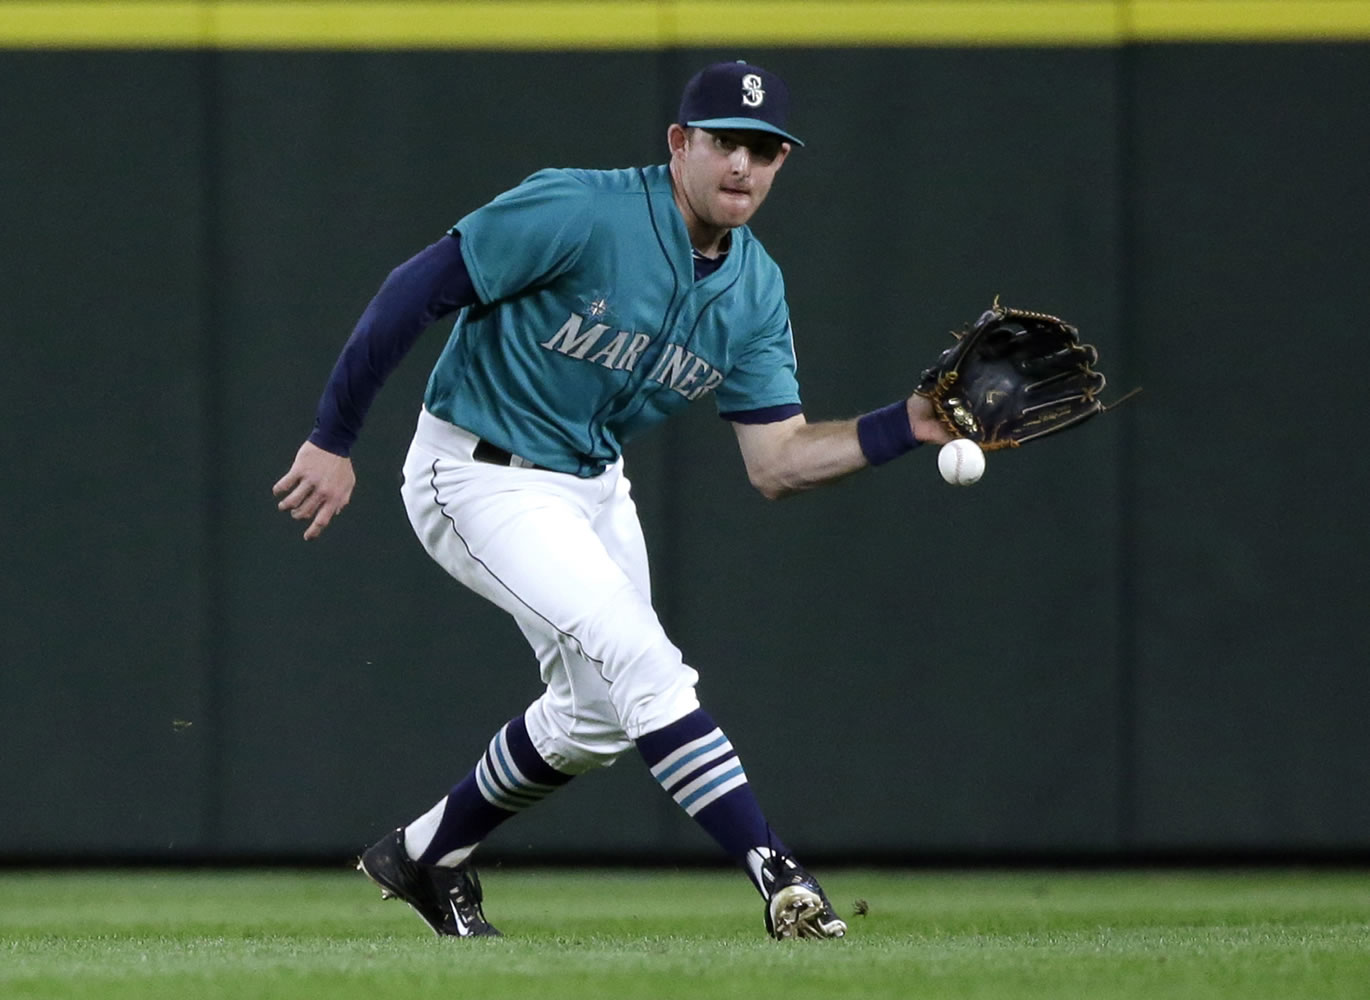 Brad Miller was part of a six-player swap that sends Miller, first baseman Logan Morrison and pitcher Danny Farquhar to Tampa Bay for pitchers Nathan Karns and C.J. Riefenhauser, and minor league outfielder Boog Powell.